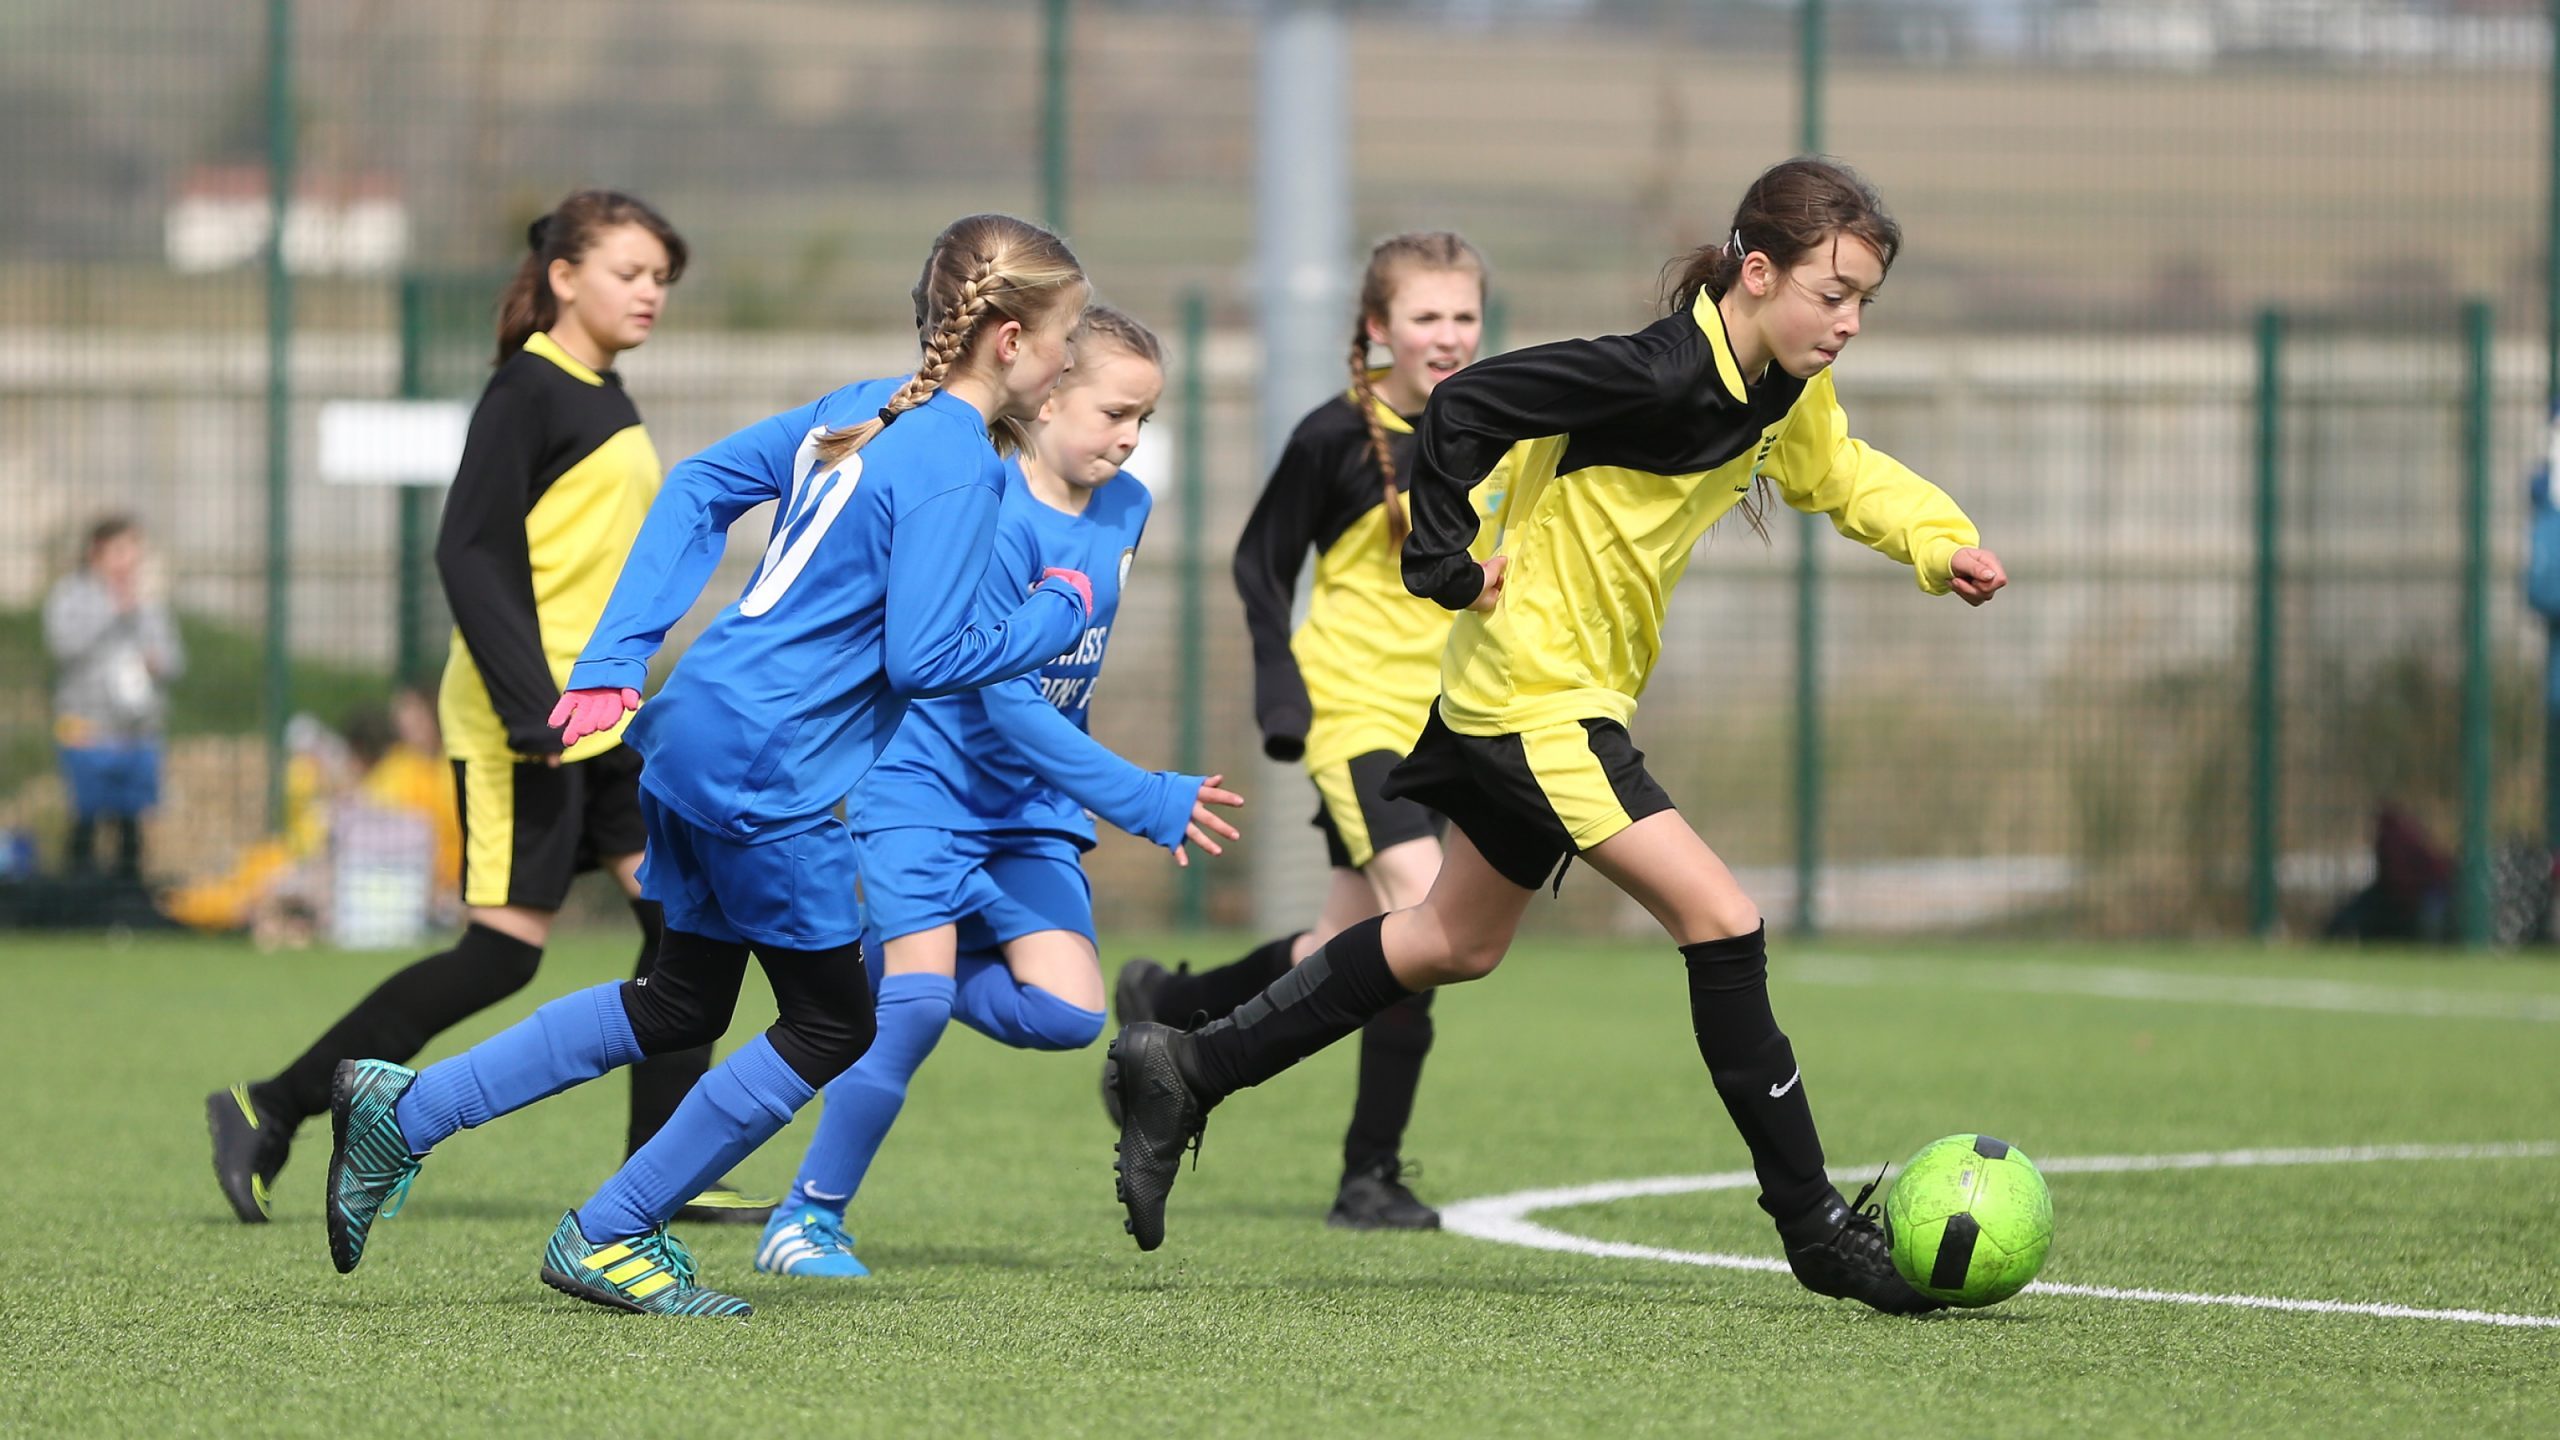 girls playing football in blue and dark and yellow kits